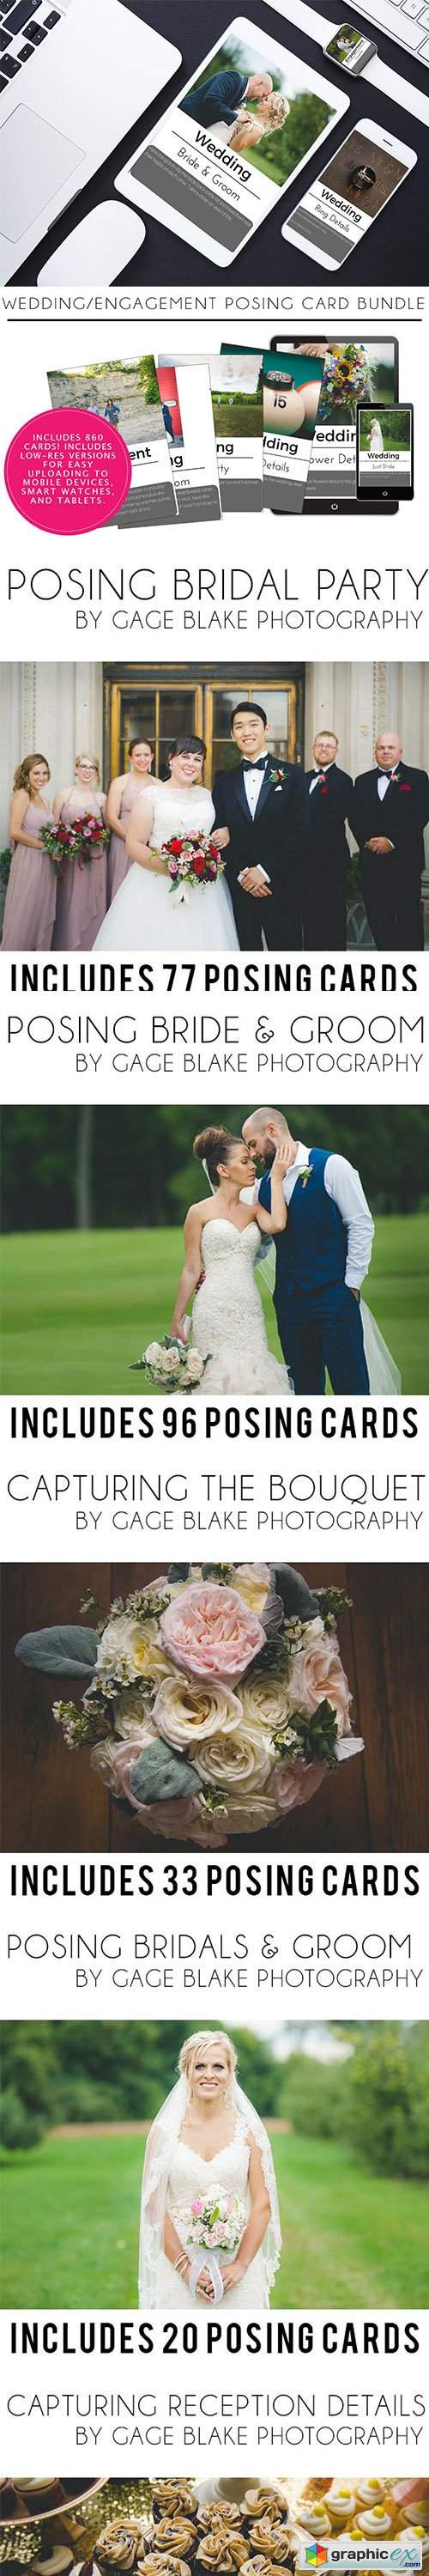 860 Wedding and Engagement Posing Card Bundle by Gage Blake Photography